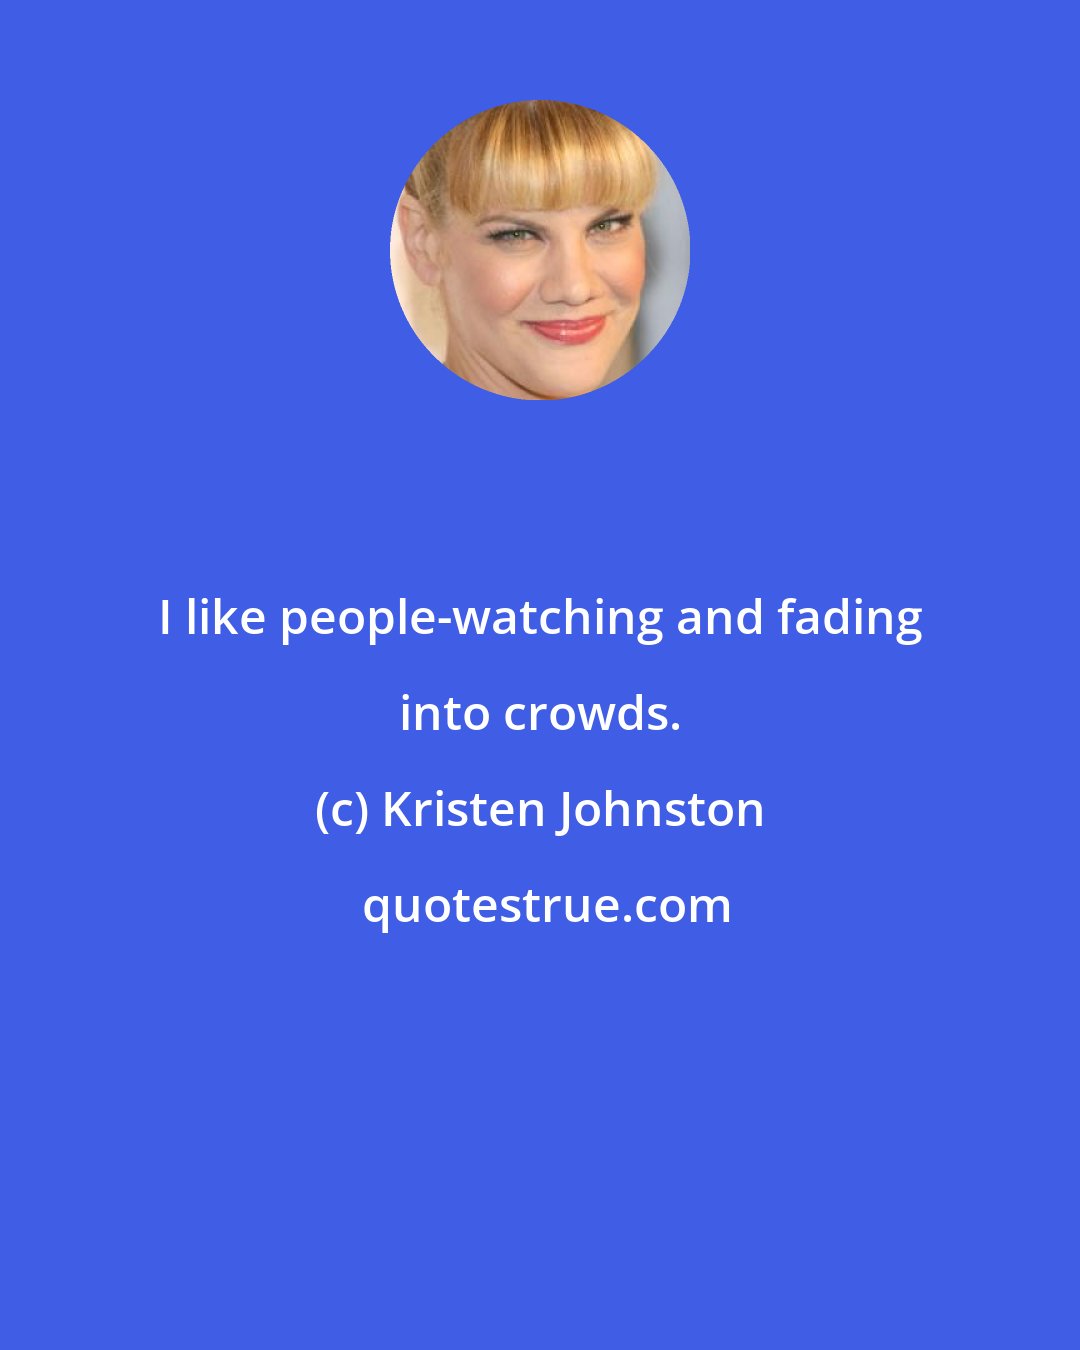 Kristen Johnston: I like people-watching and fading into crowds.